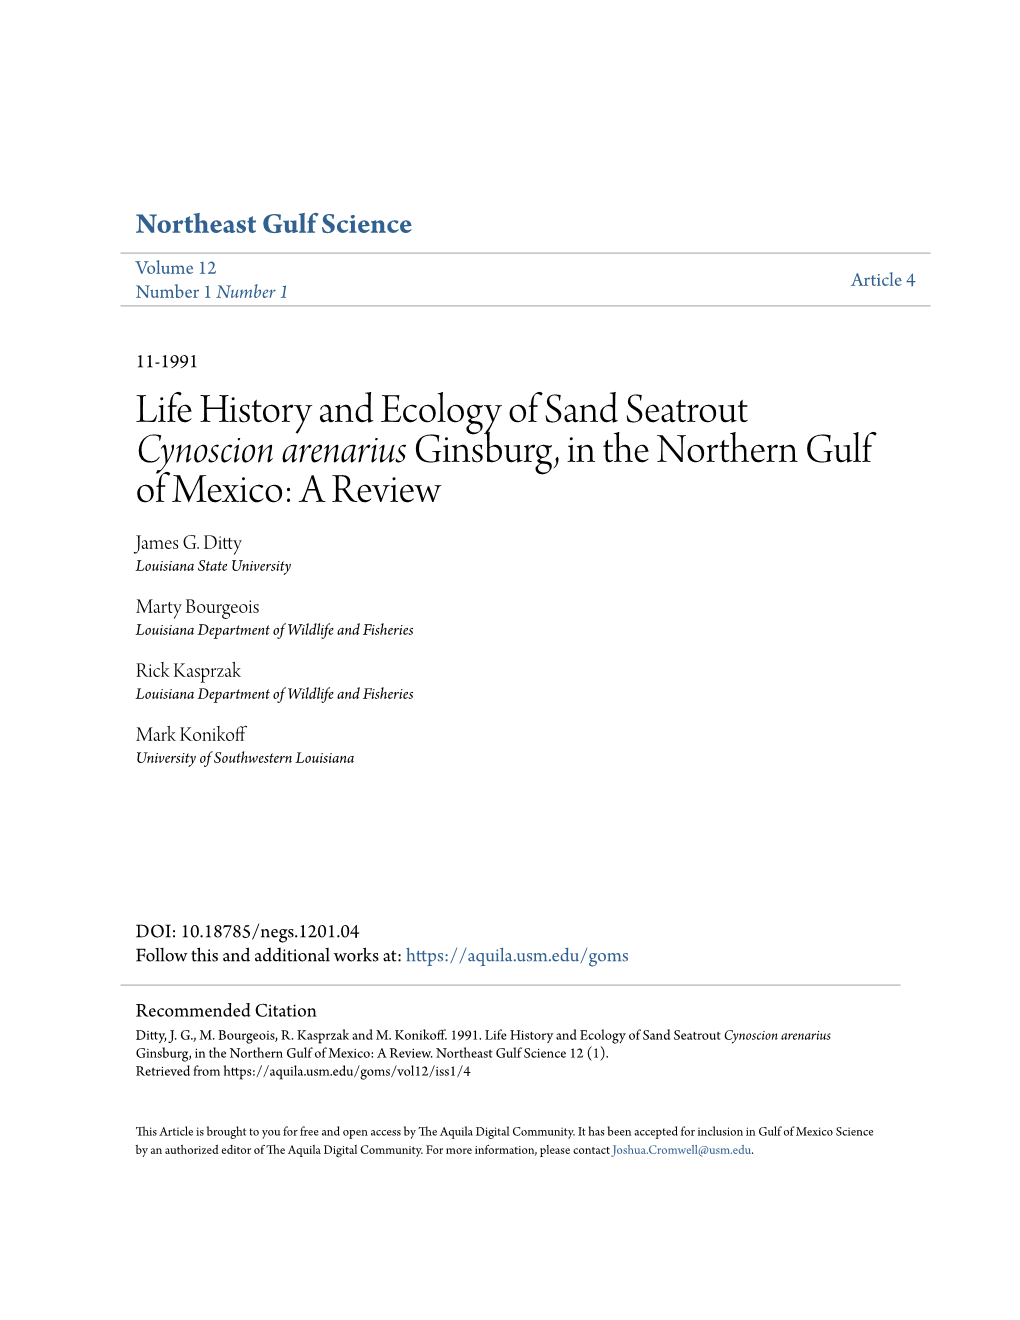 Life History and Ecology of Sand Seatrout Cynoscion Arenarius Ginsburg, in the Northern Gulf of Mexico: a Review James G